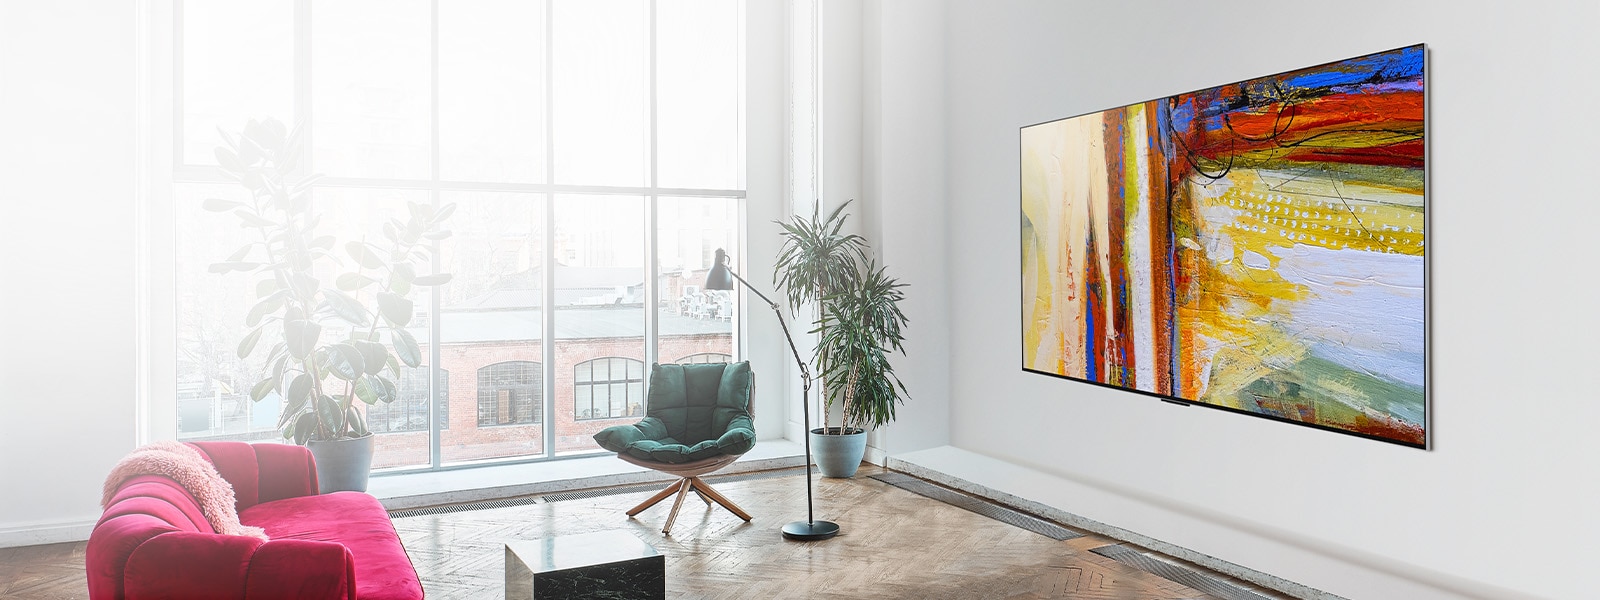 An image of LG OLED G3 showing a colorful abstract artwork in a bright and vivid room.